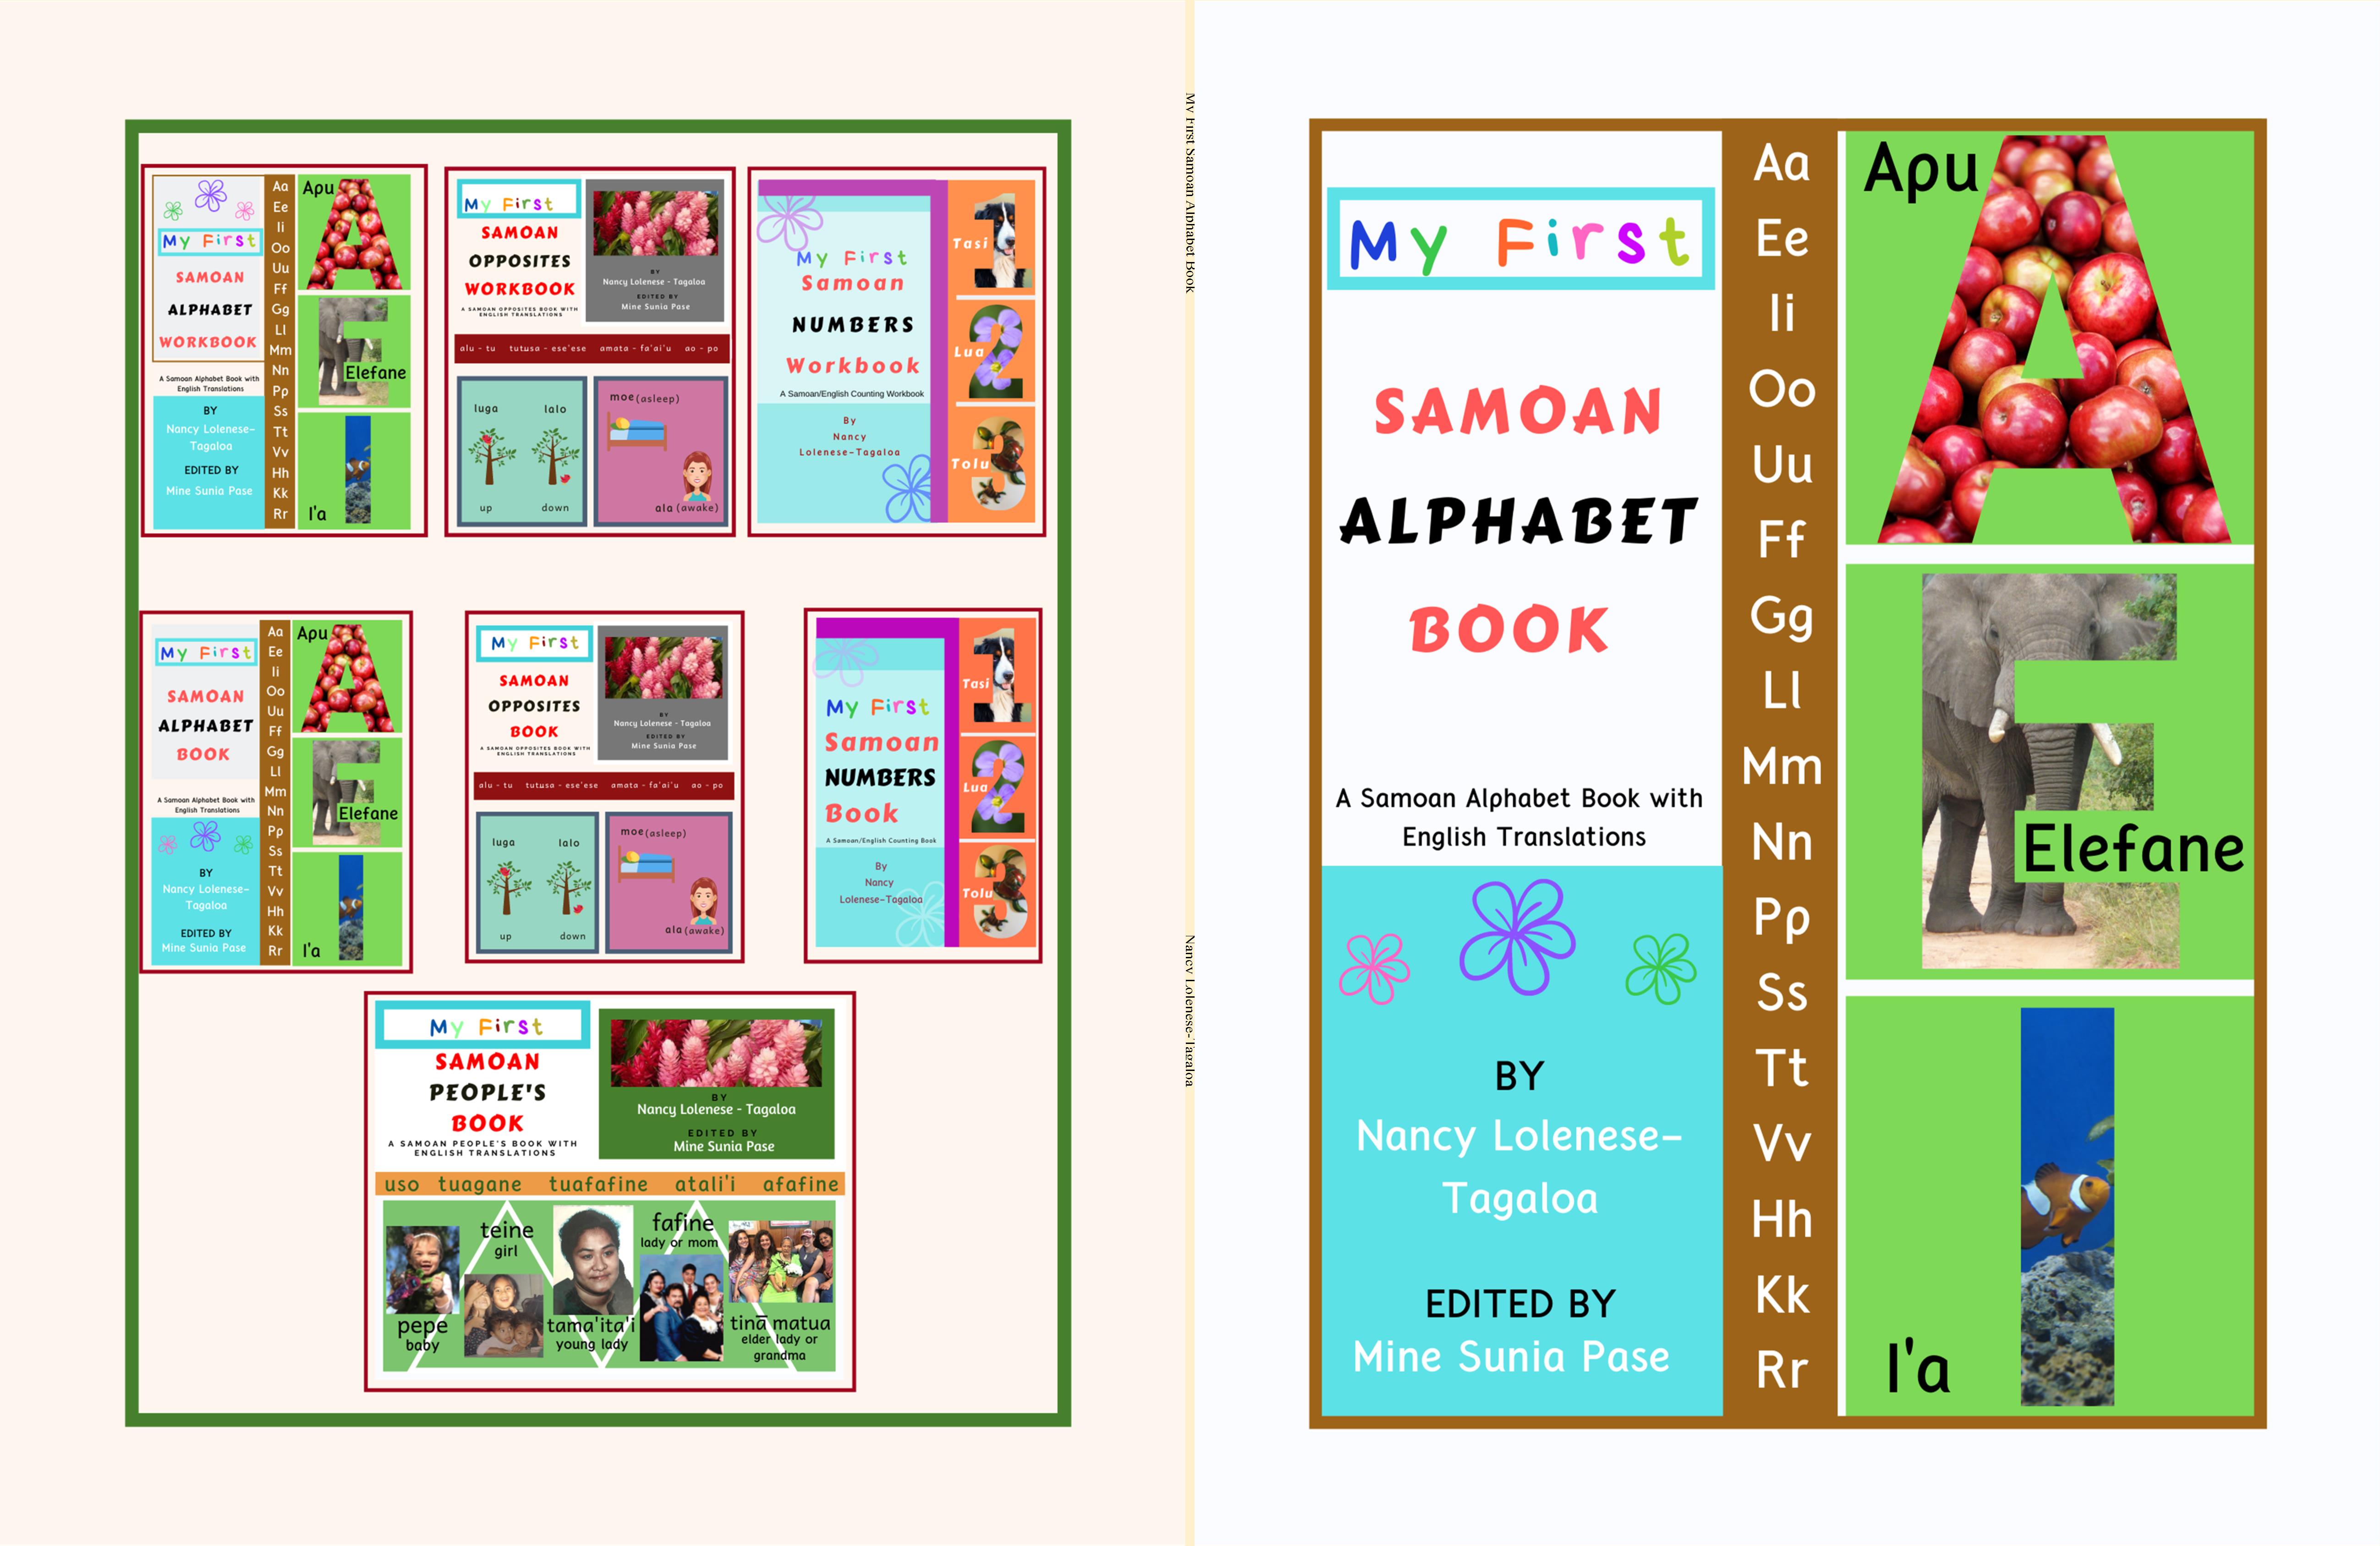 My First Samoan Alphabet Book cover image